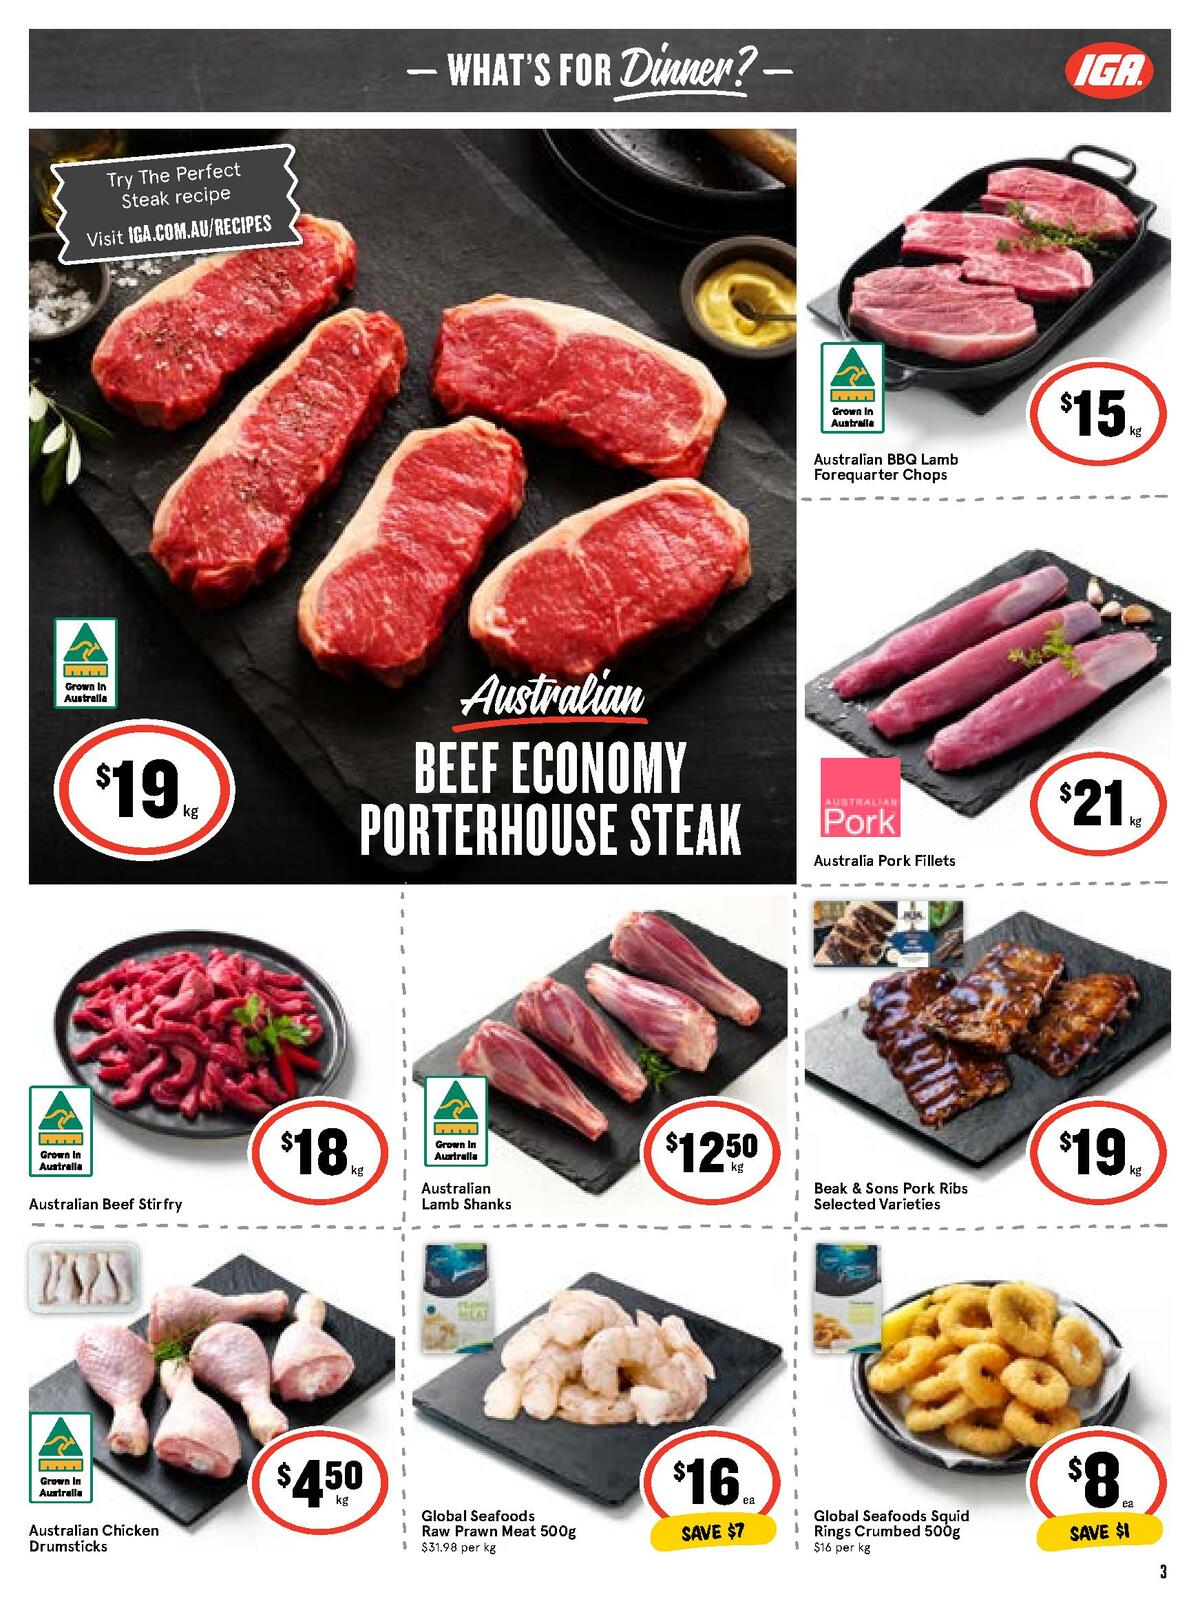 IGA Catalogues from 9 September